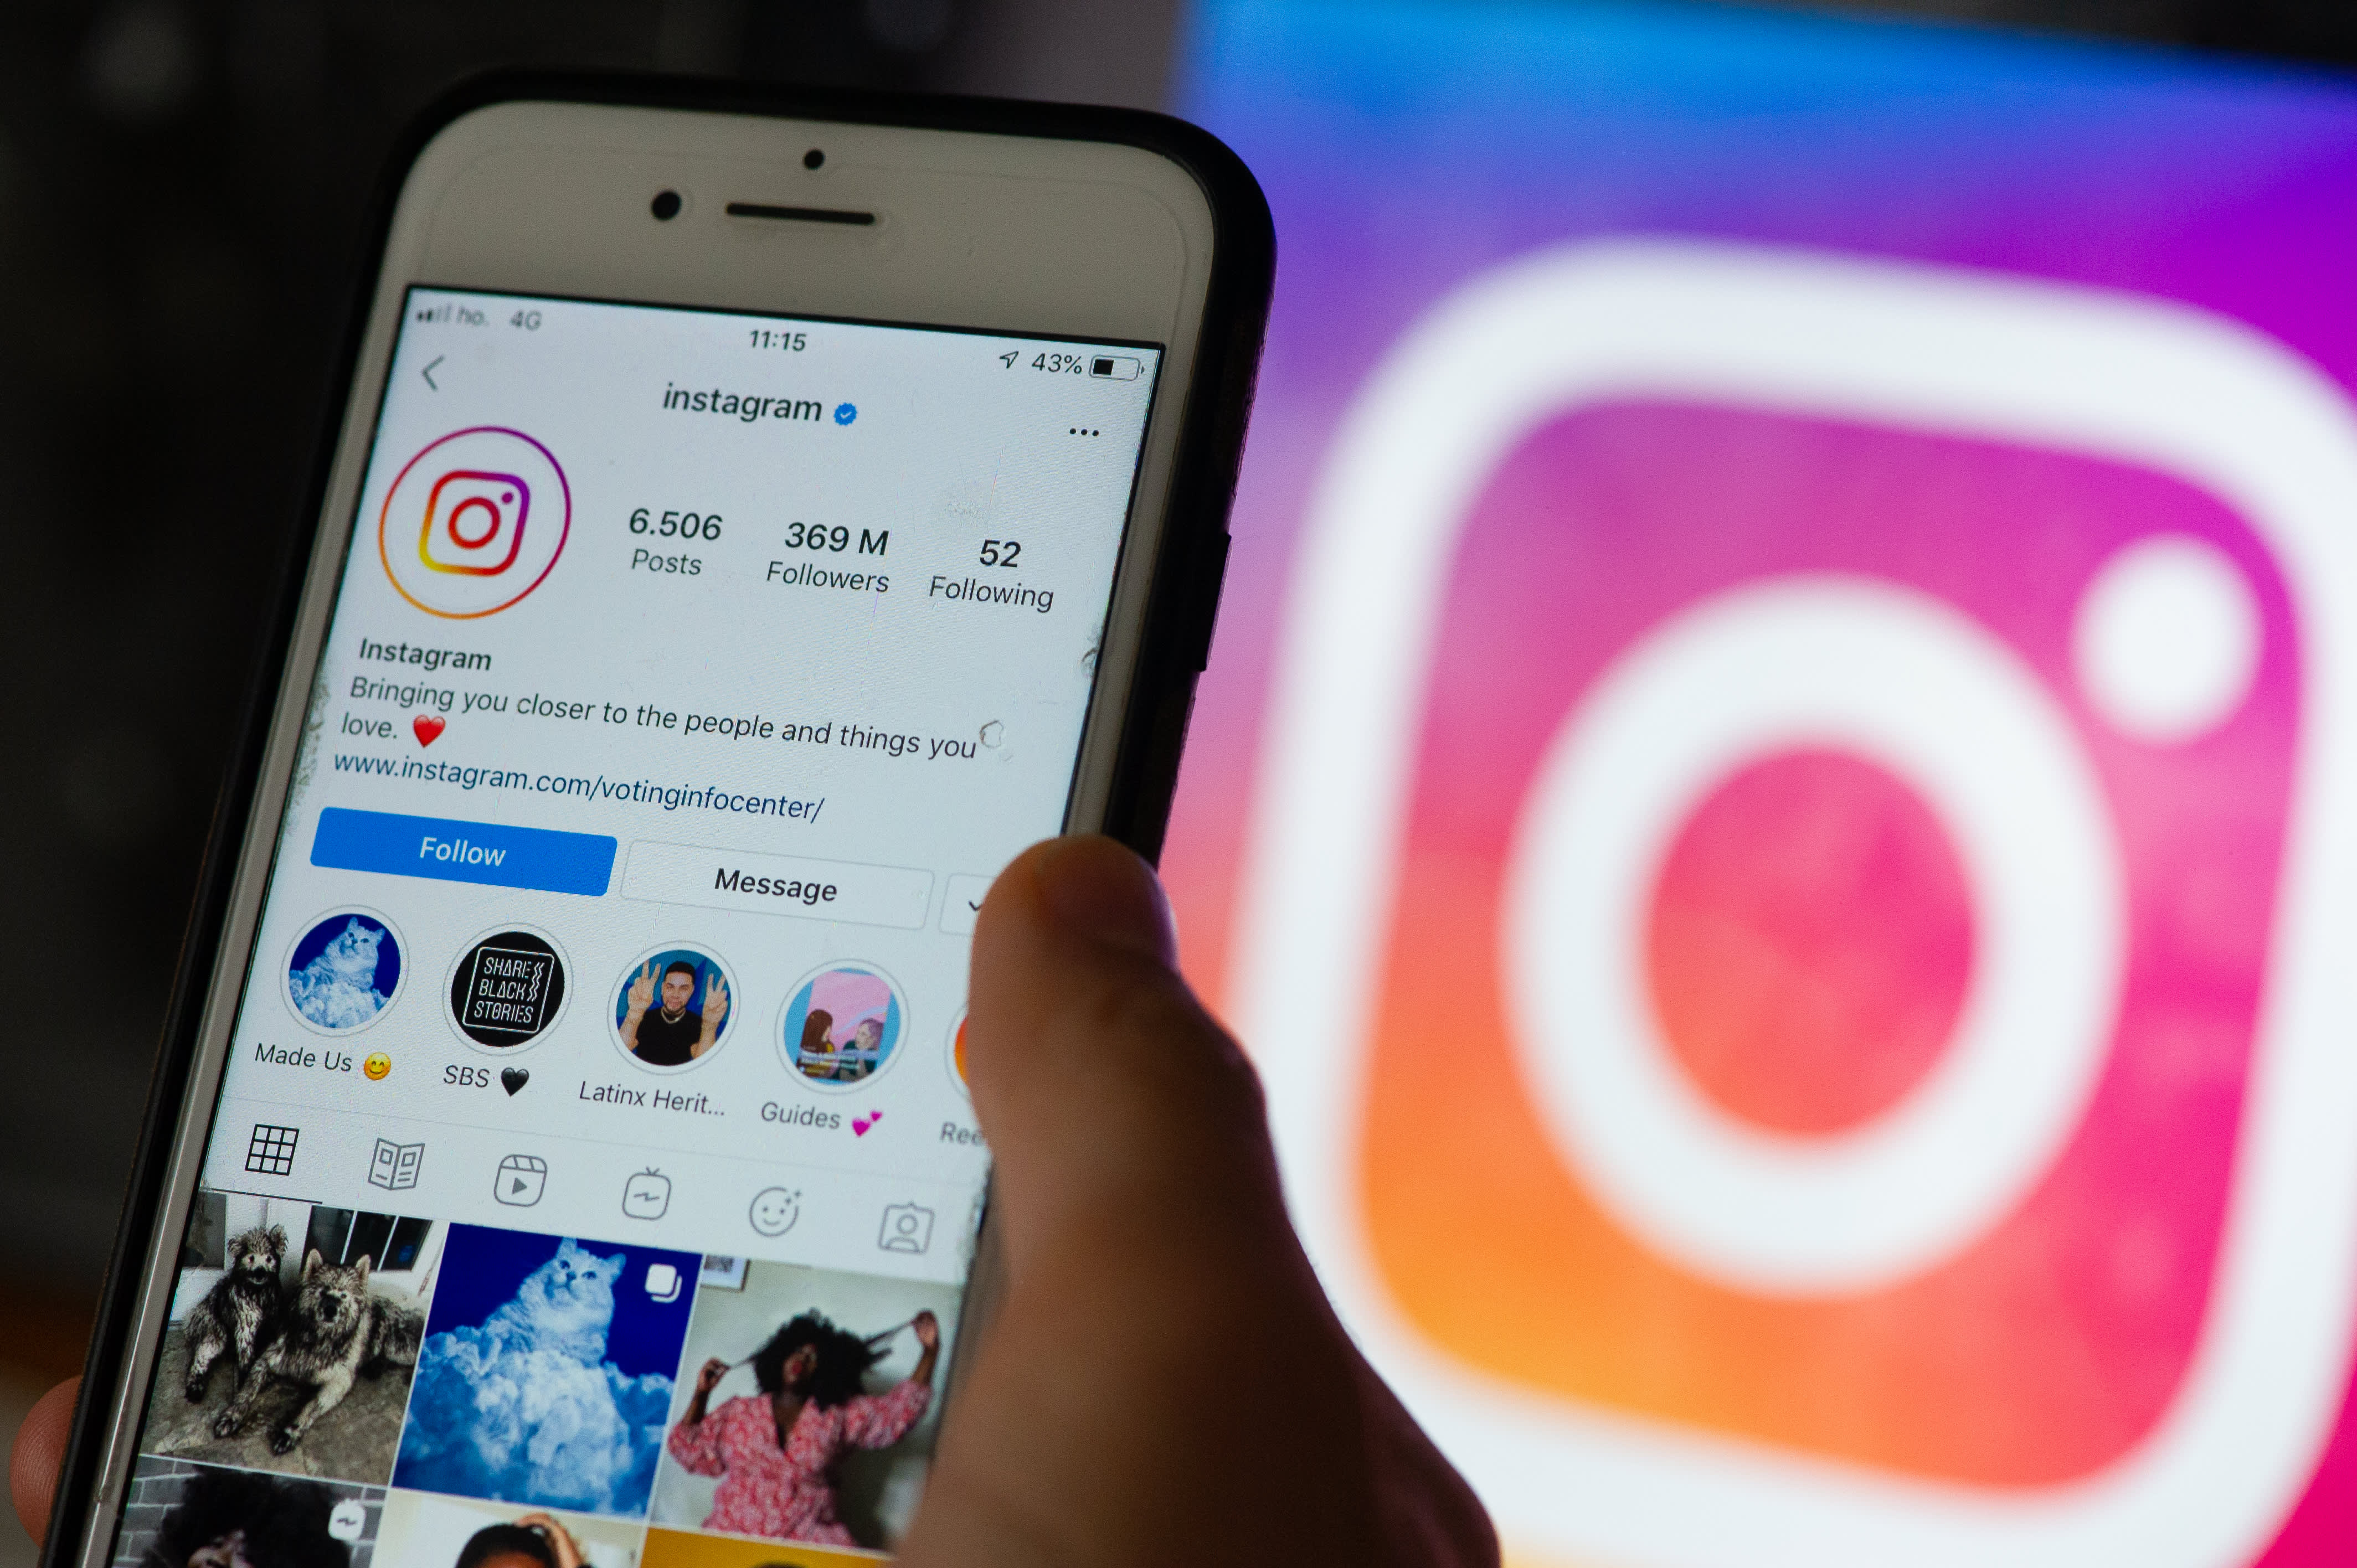 Instagram surpasses 2 billion monthly users while powering through a year of turmoil